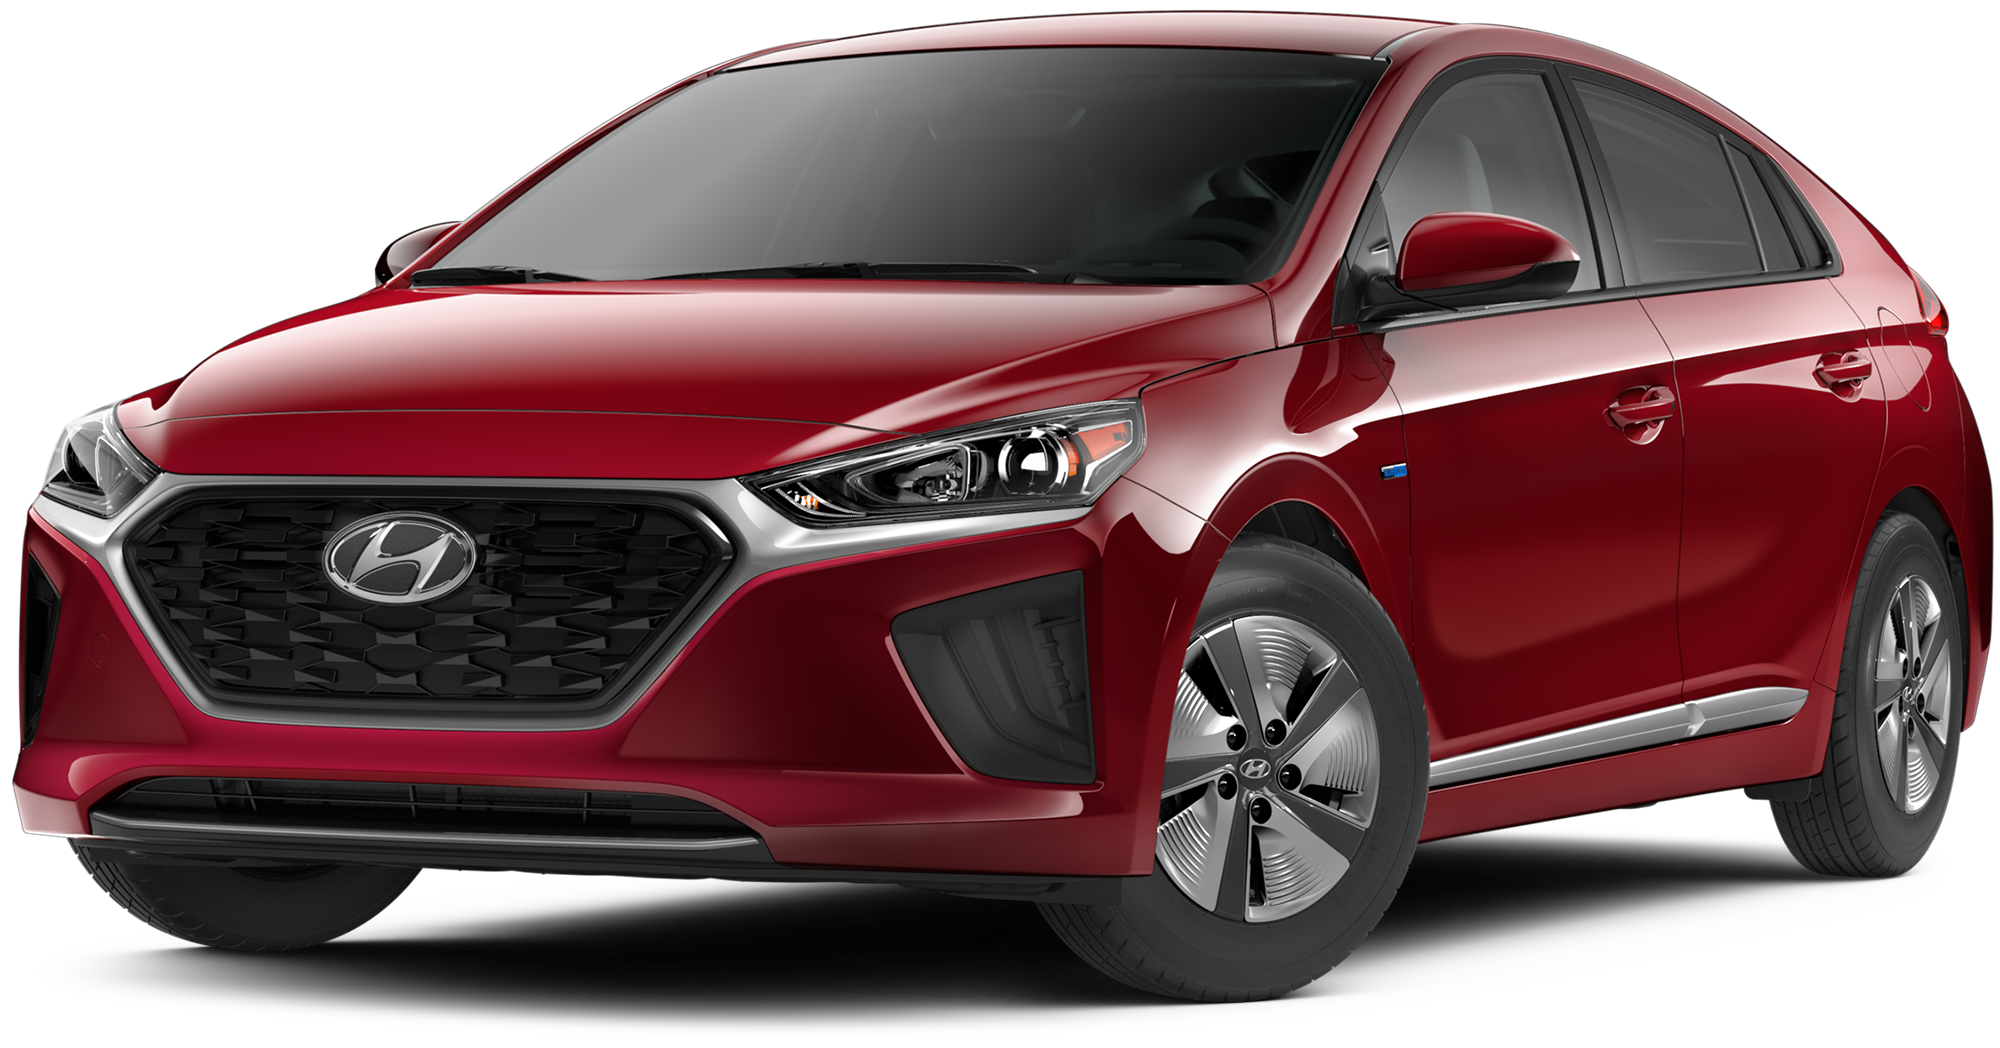 2020 Hyundai Ioniq Hybrid Incentives, Specials & Offers in Van Nuys CA